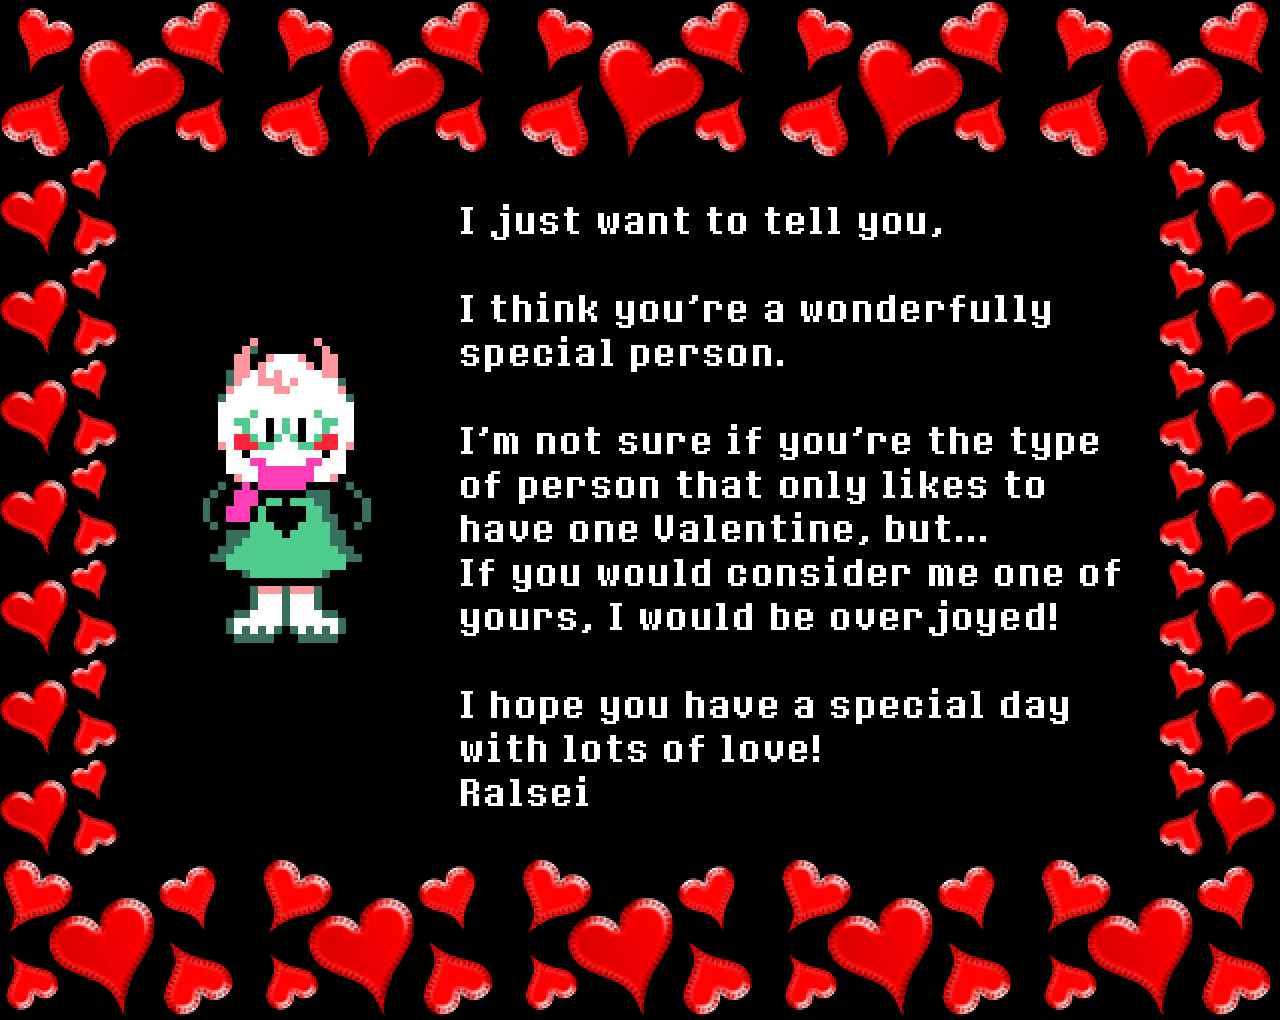 Ralsei: I just want to tell you, I think you’re a wonderfully special person.
I’m not sure if you’re the type of person that only likes to have one Valentine, but… If you would consider me one of yours, I would be overjoyed!

I hope you have a special day with lots of love!
Ralsei